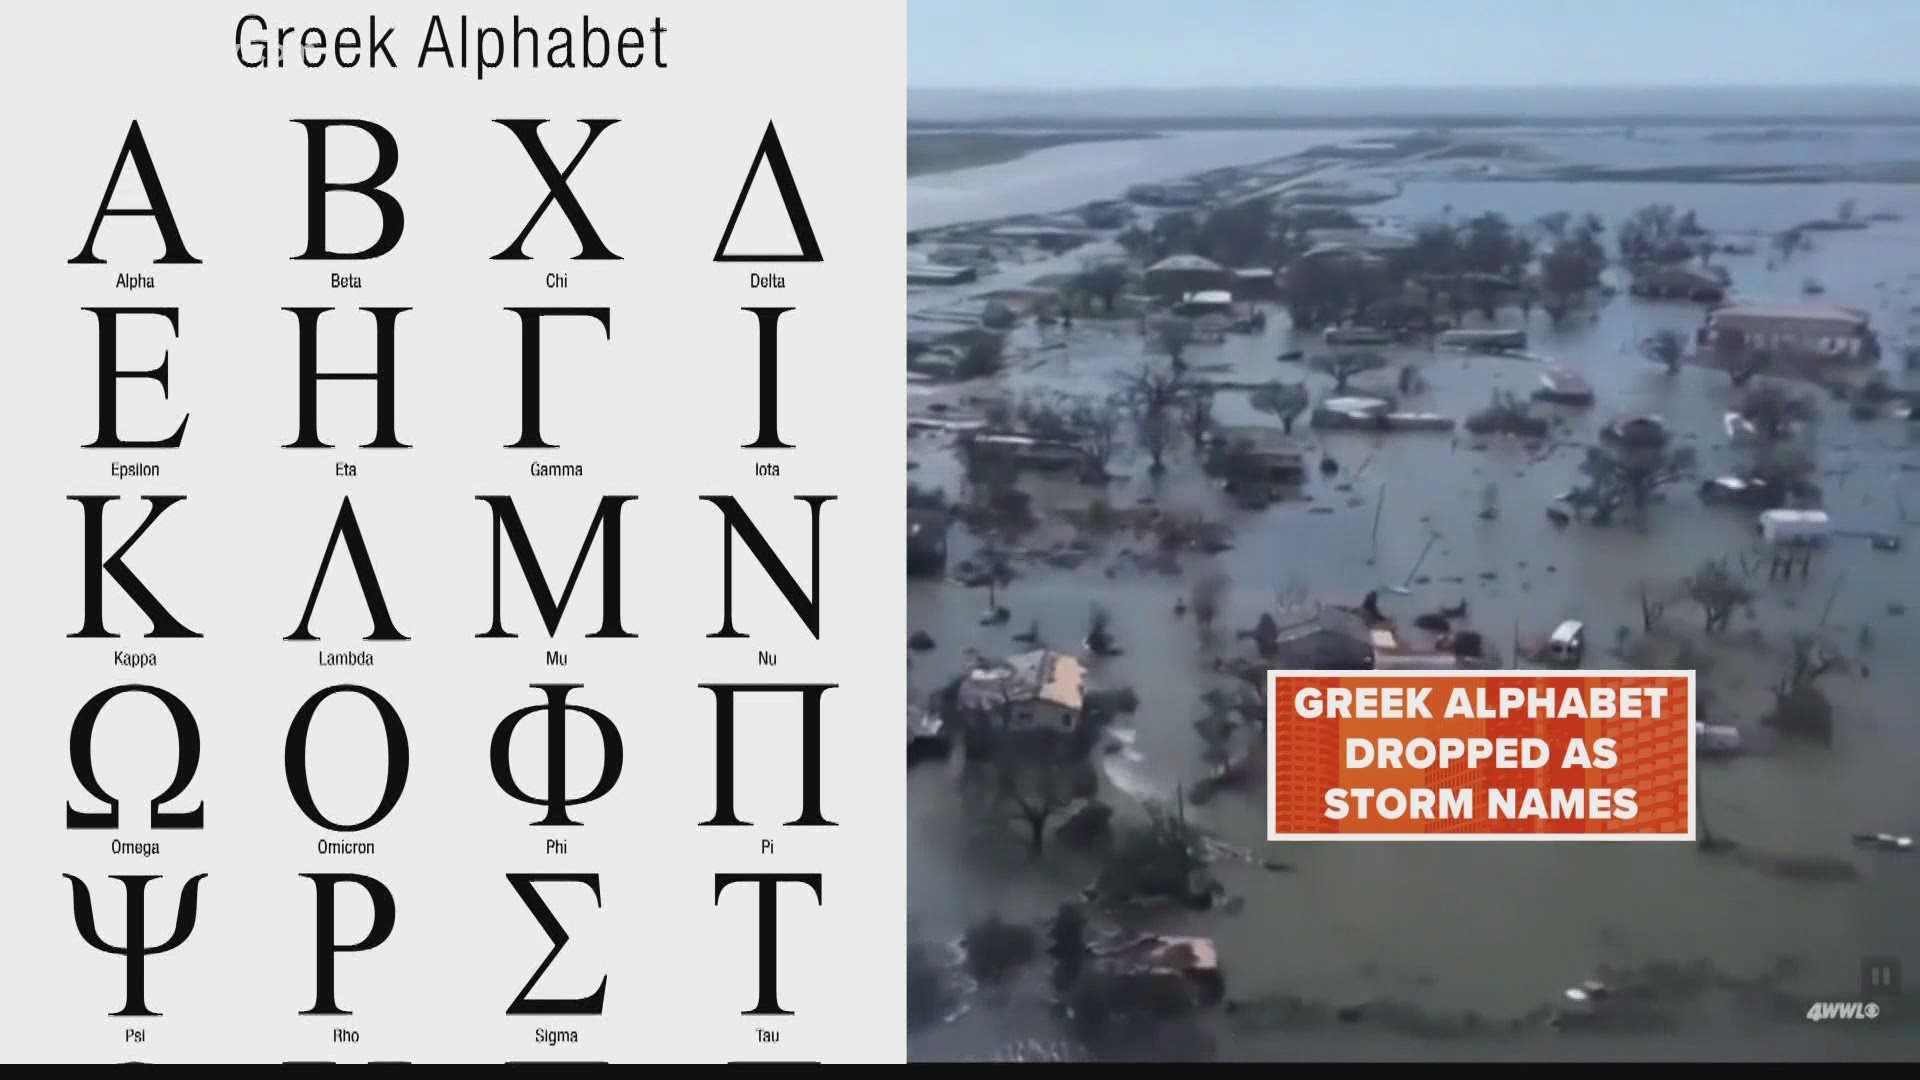 The organization called it "distracting and confusing" to use the Greek alphabet in 2020.